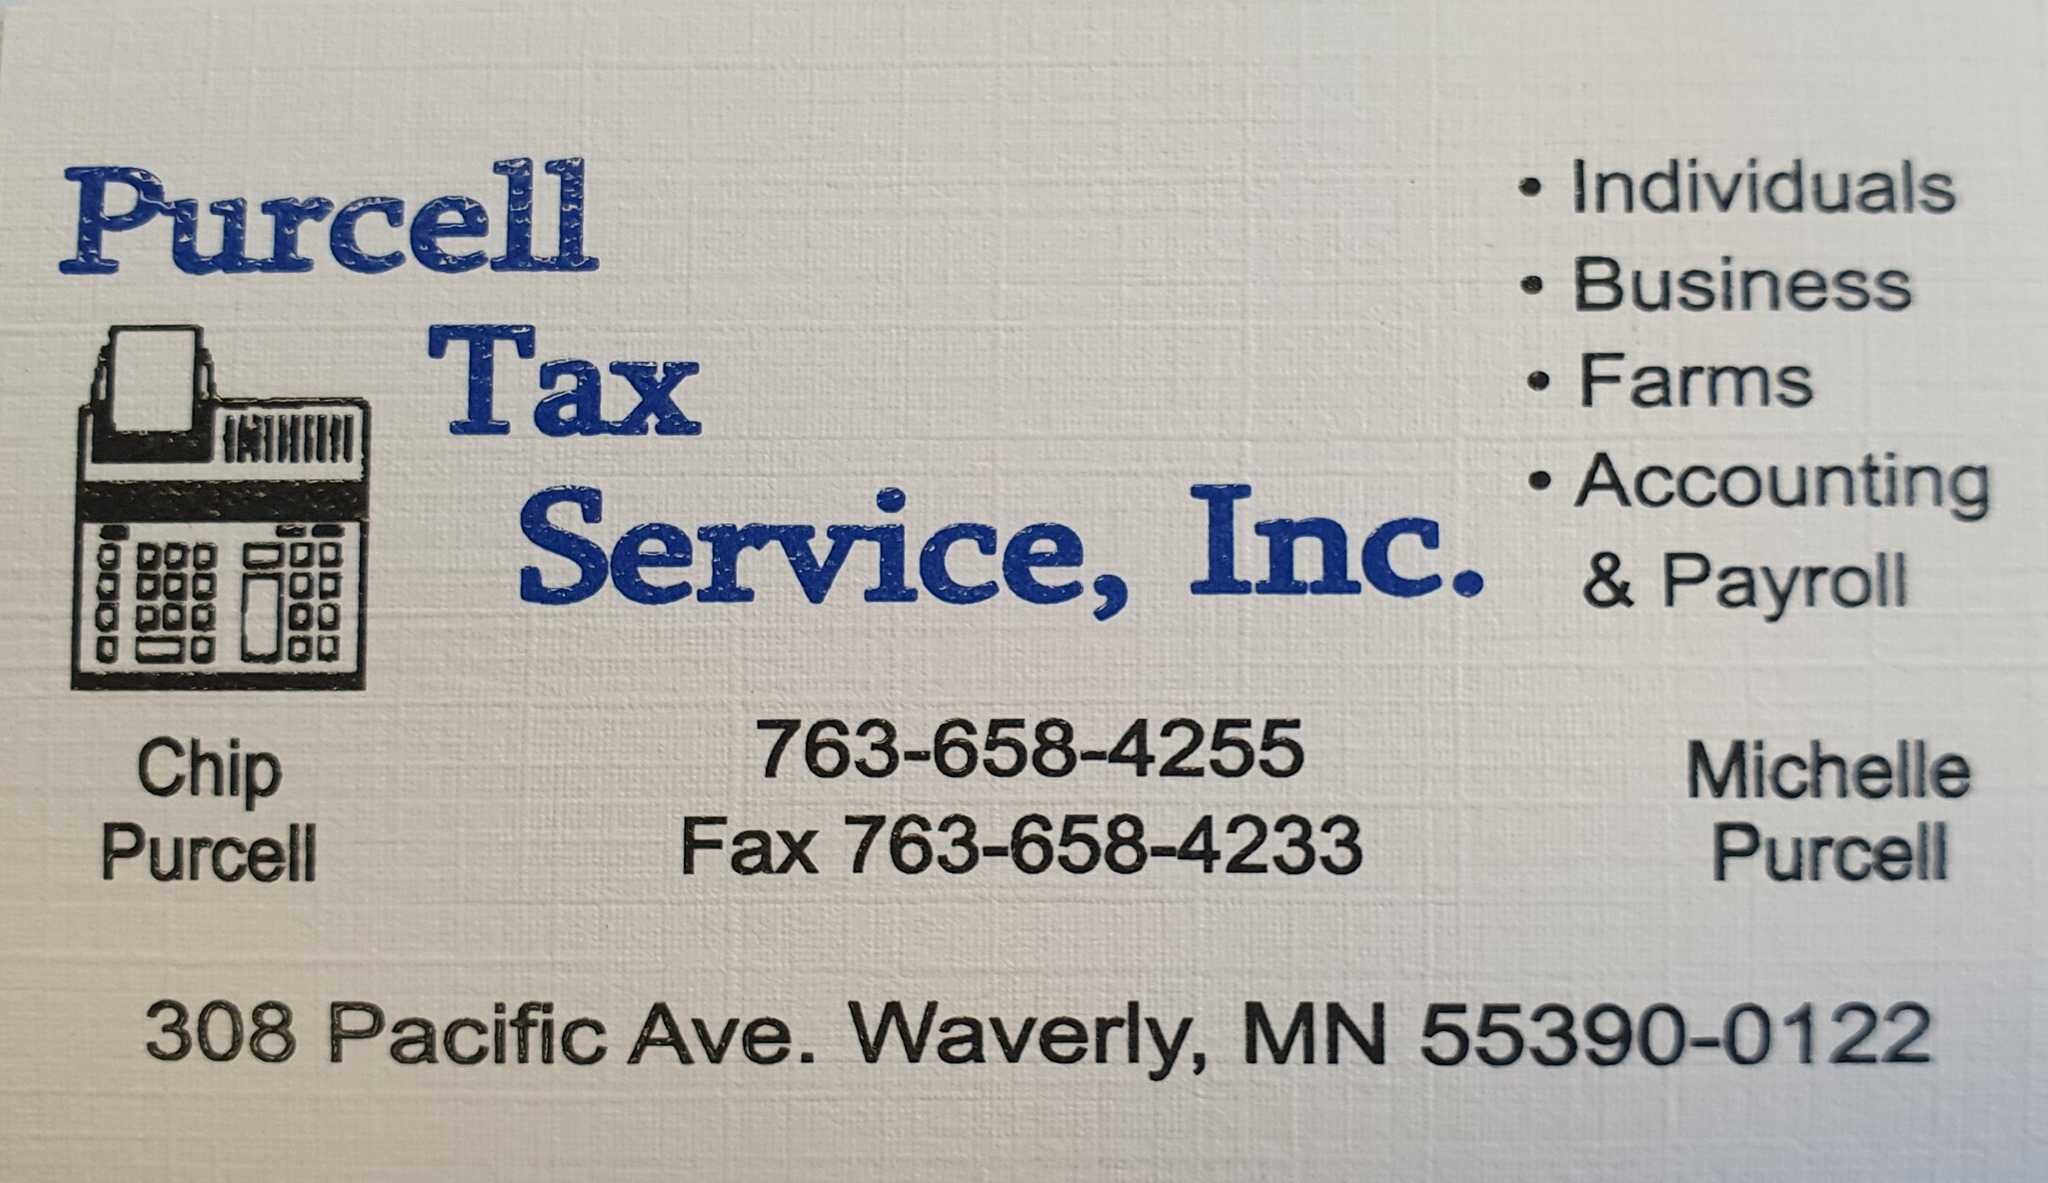 Purcell Tax Service Inc 308 Pacific Ave, Waverly Minnesota 55390